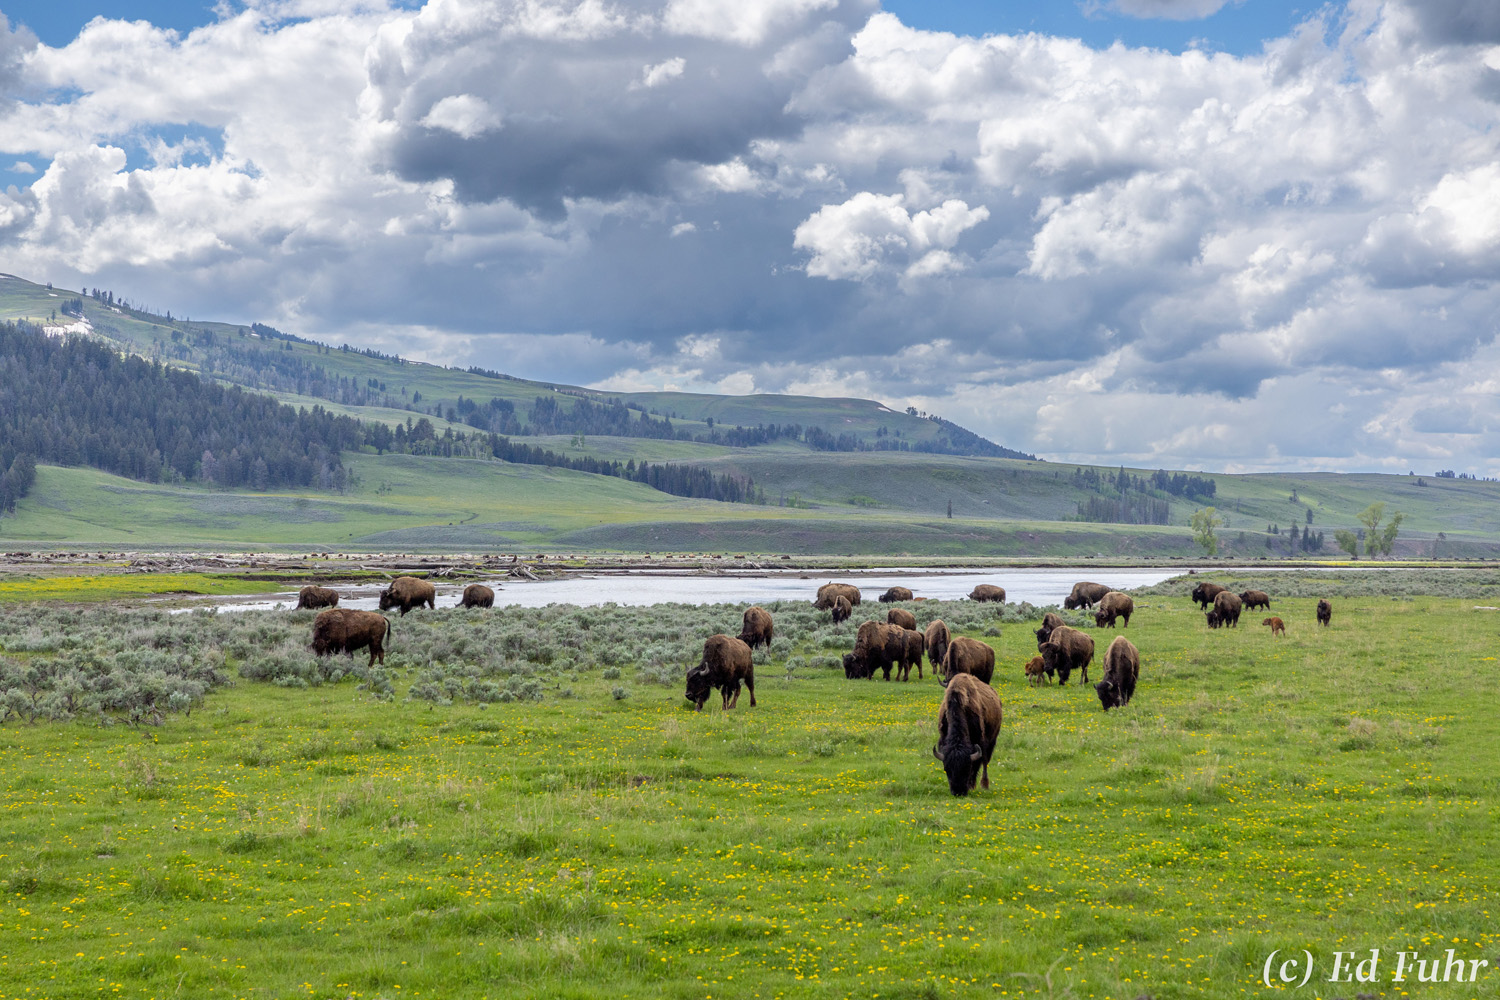 Considered one of the world's best places to view wildlife, the Lamar Valley teems with wildlife from bears, wolves, foxes, to...